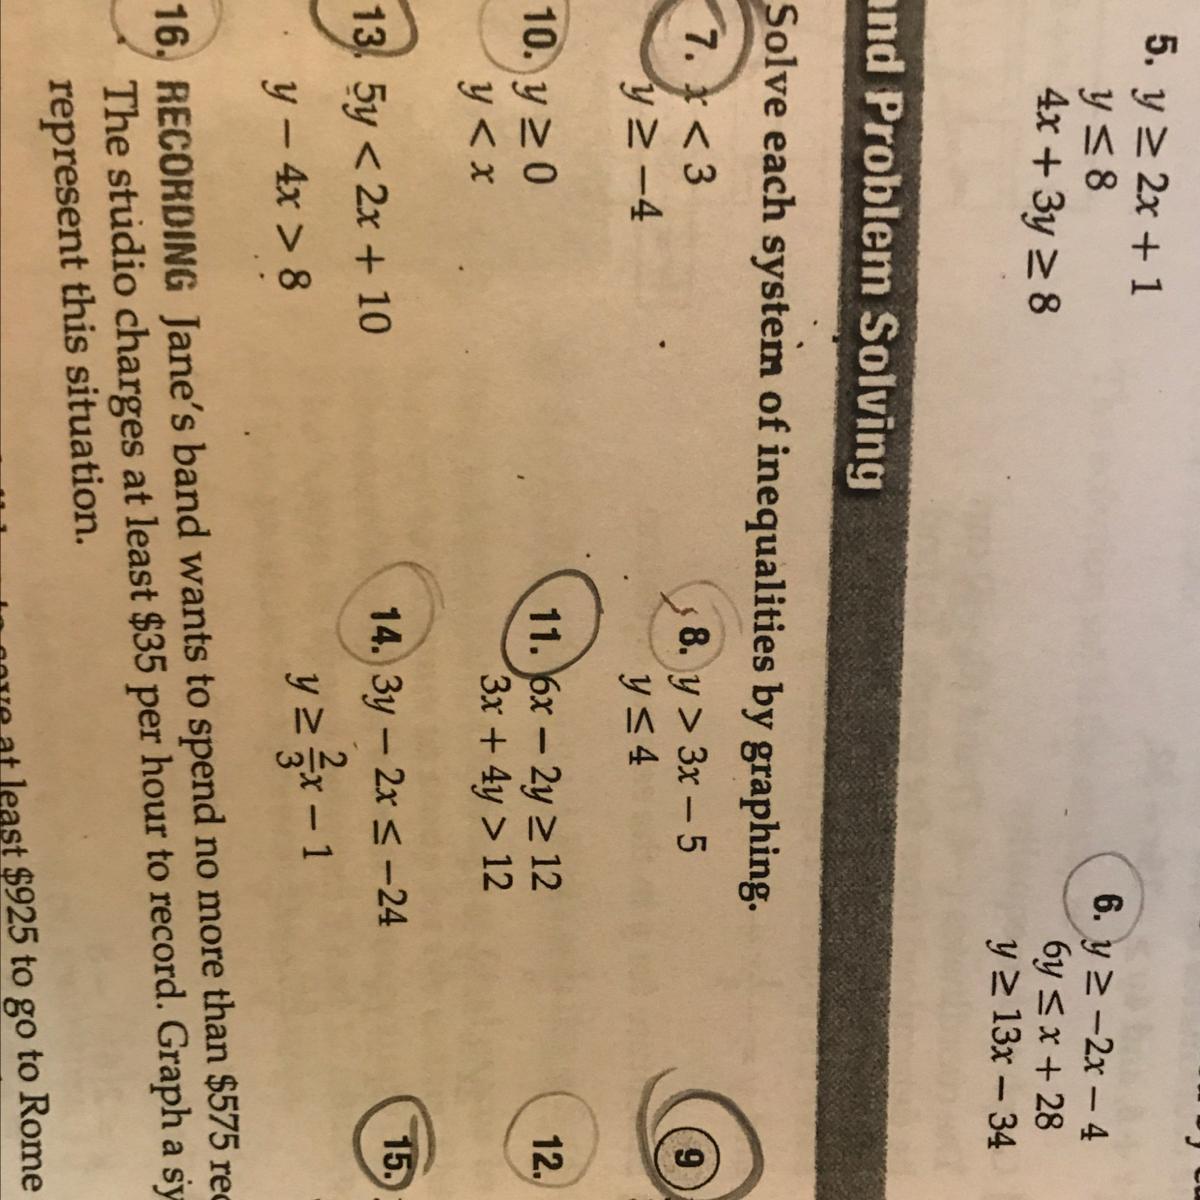 Can Someone Help Me With Number 7 And 13 ? I Graduate In A Week An Have To Have This Work Done Or I Will